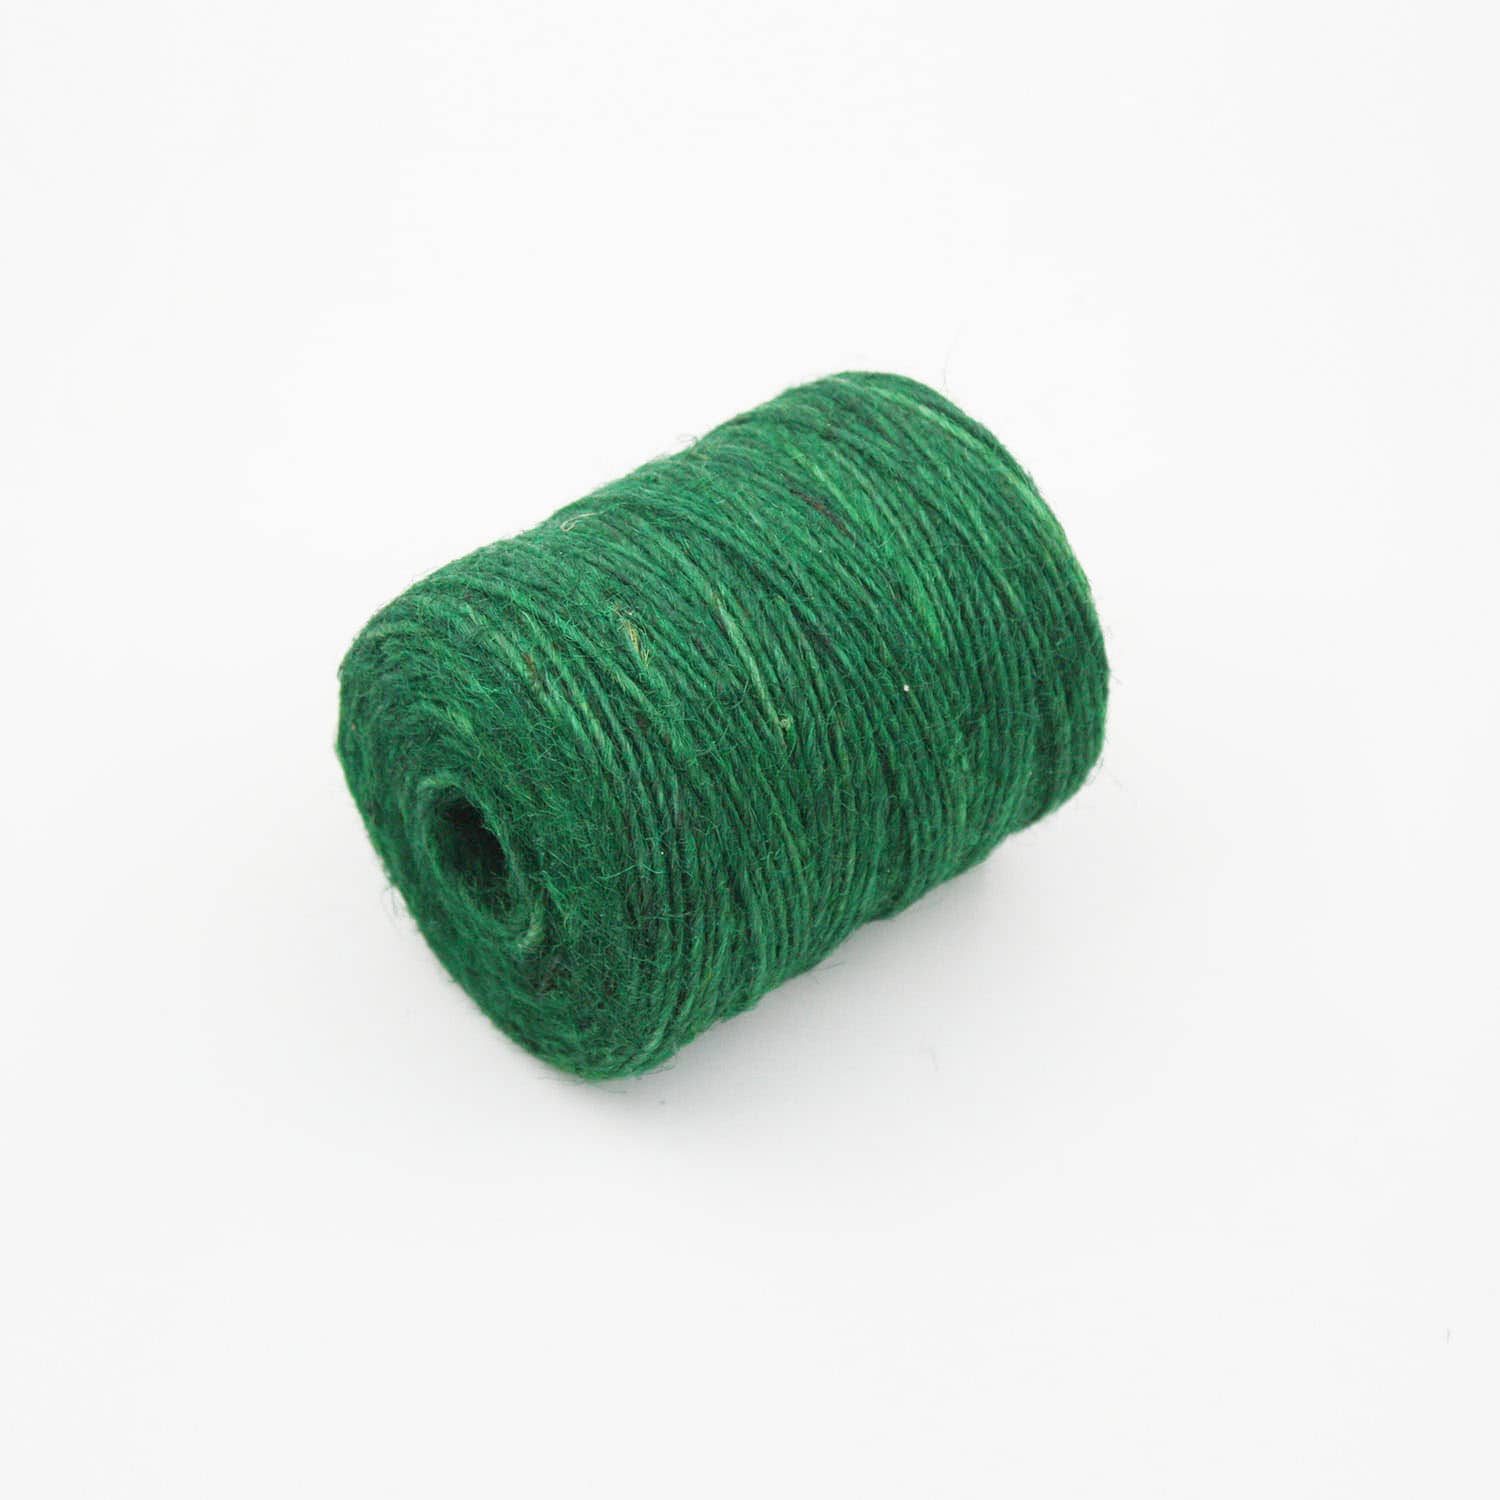 Natural fiber Jute Twine is a natural string for tying plants and making  trellises.